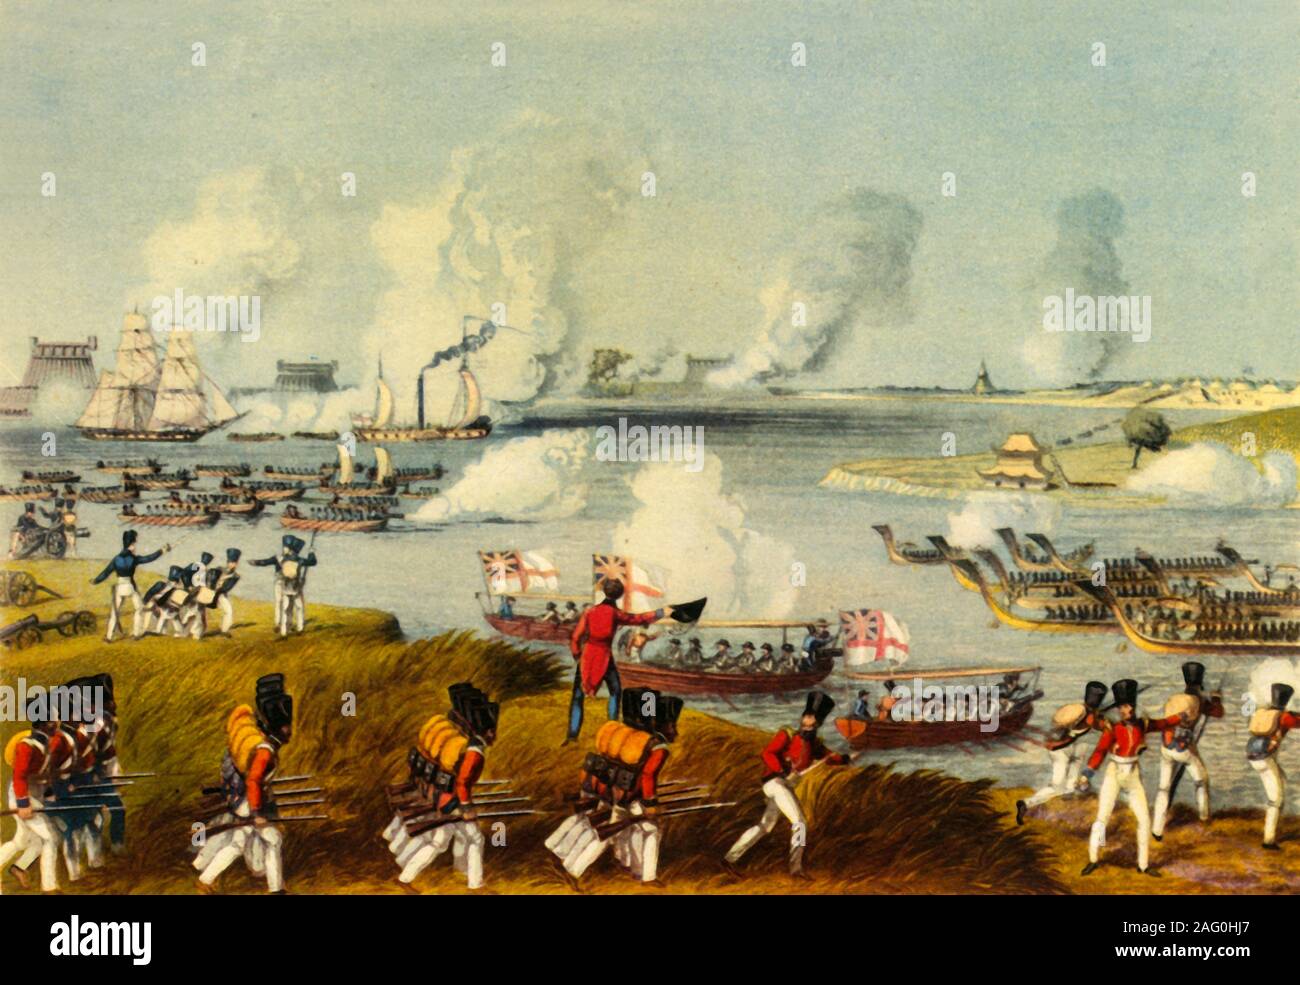 'Combined Naval and Military Forces, Burma, 27th March, 1825', (1944). Scene from the First Anglo-Burmese War, fought between the British and Burmese empires: 'The combined [British] forces under Brigadier Cotton and Captain Alexander passing the fortress of Donabue to effect a junction with Sir Archibald Campbell'. From &quot;Rangoon Views, and Combined Operations in the Birman Empire&quot; by Lt Joseph Moore. Published in &quot;British Soldiers', by S. H. F. Johnston. [Collins, London, 1944] Stock Photo